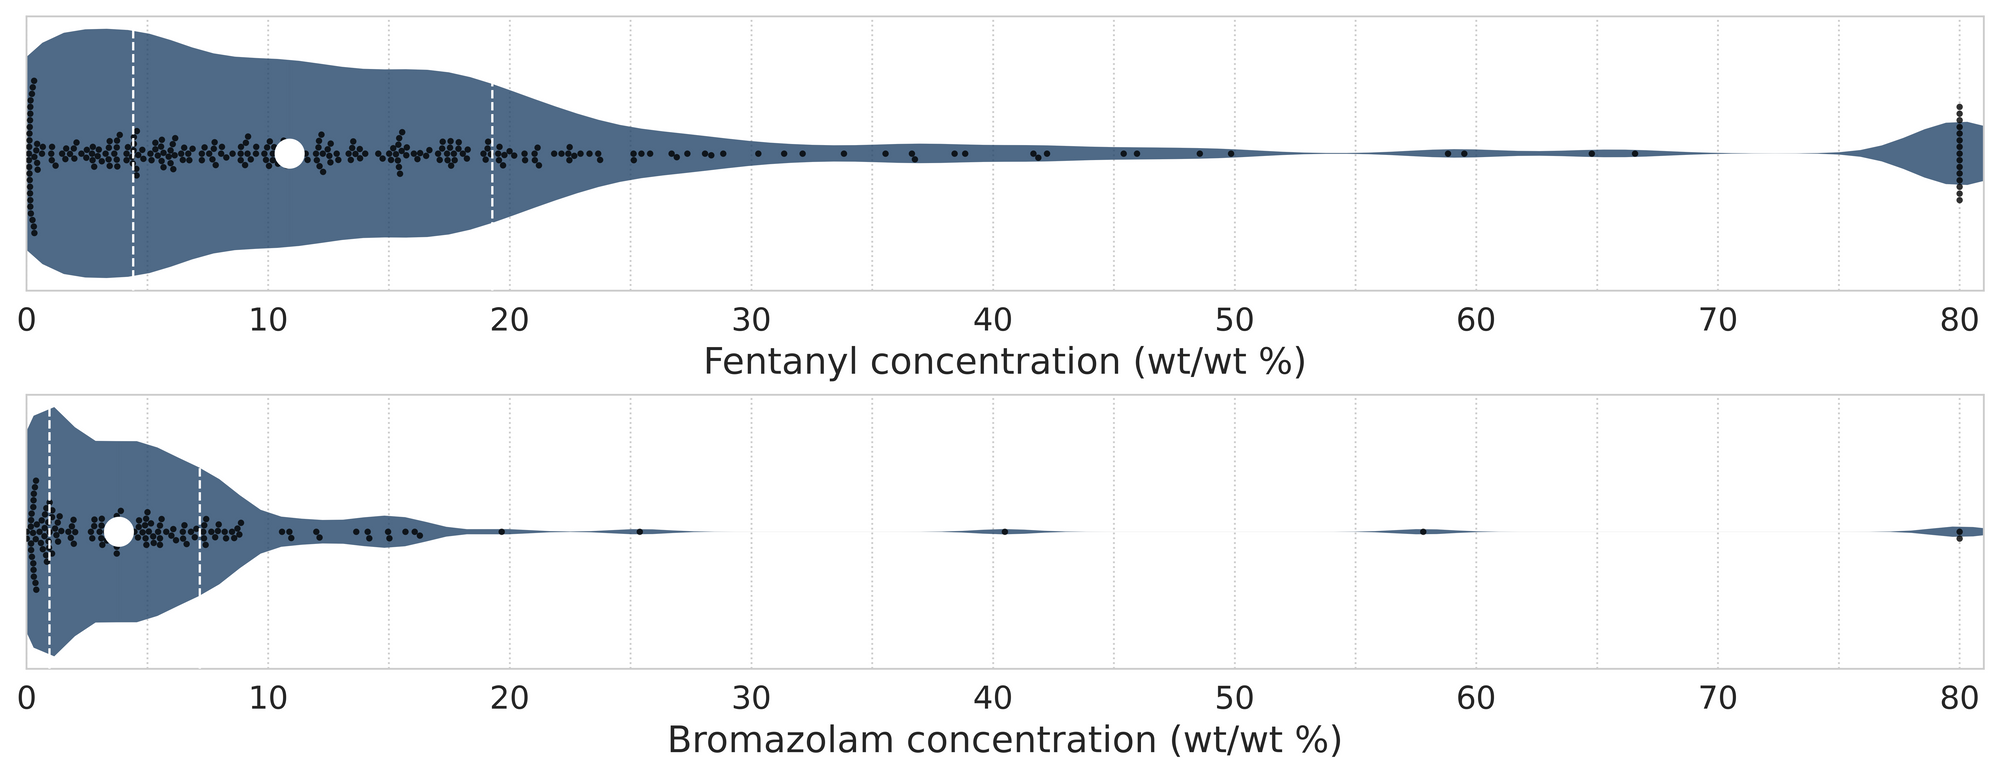 Figure 4. Violin plots of fentanyl (top panel) and bromazolam (bottom) positive samples quantified during August across all collection locations/methods.